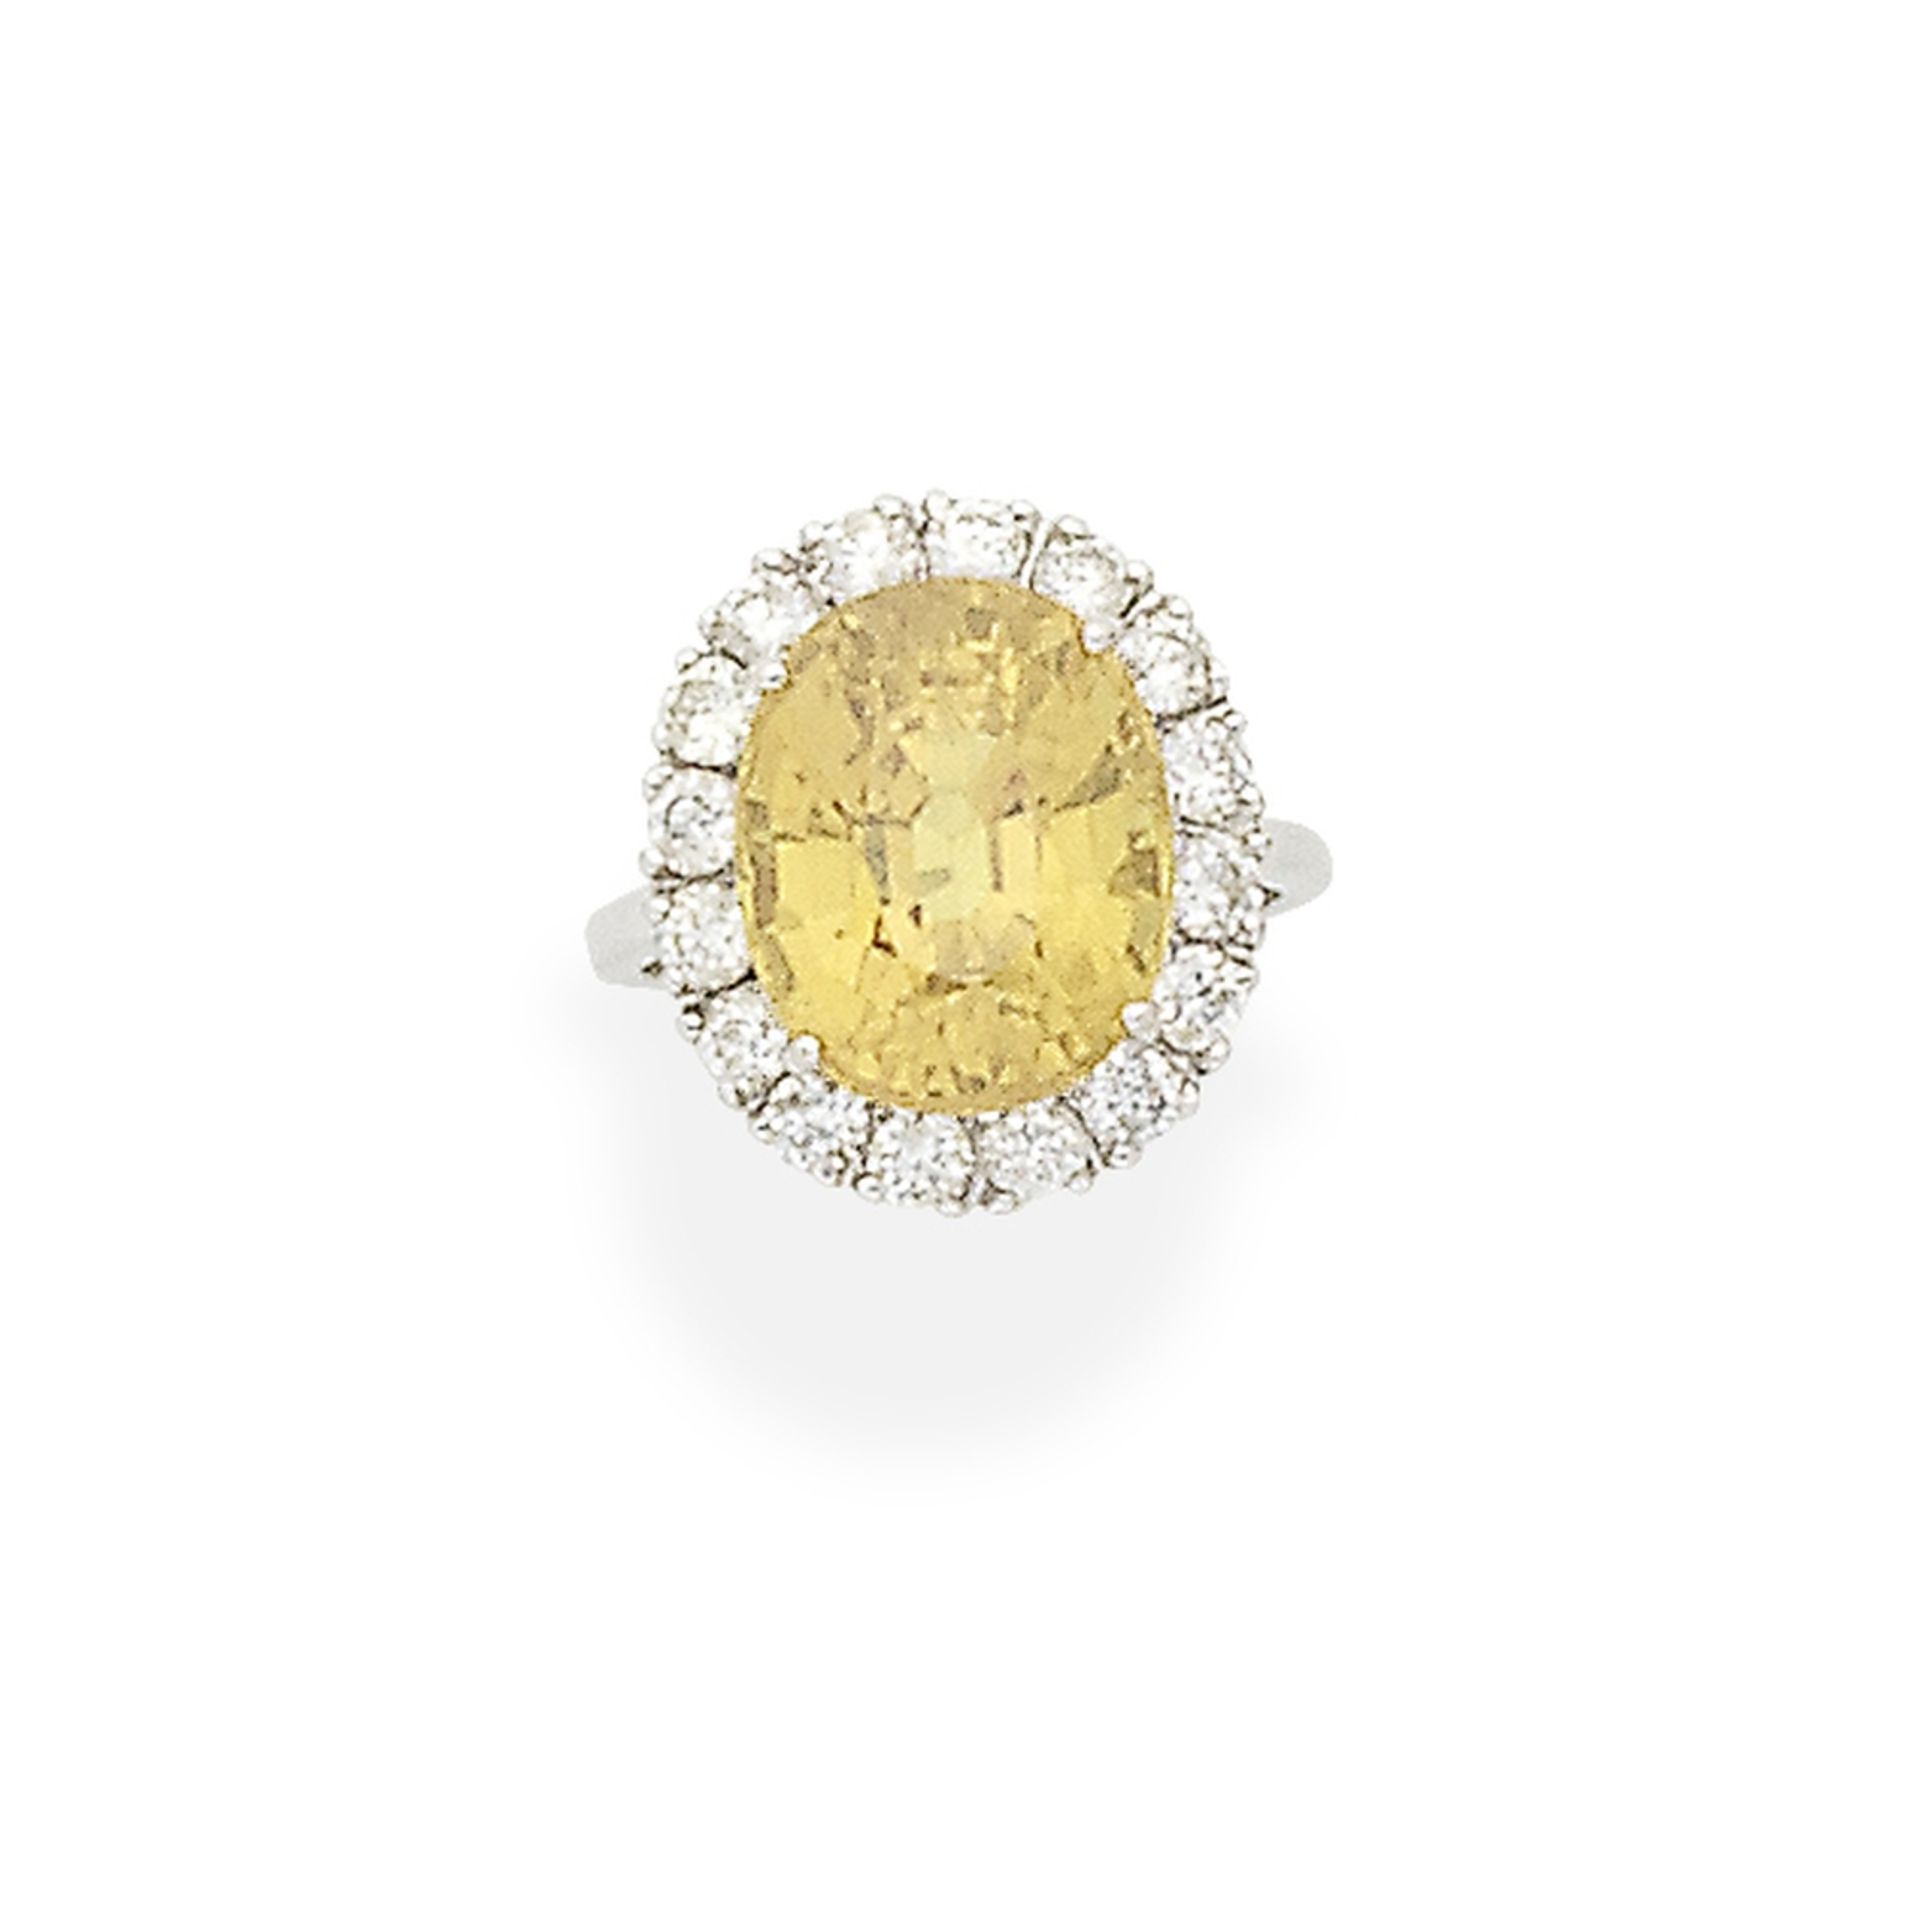 YELLOW SAPPHIRE AND DIAMOND CLUSTER RING